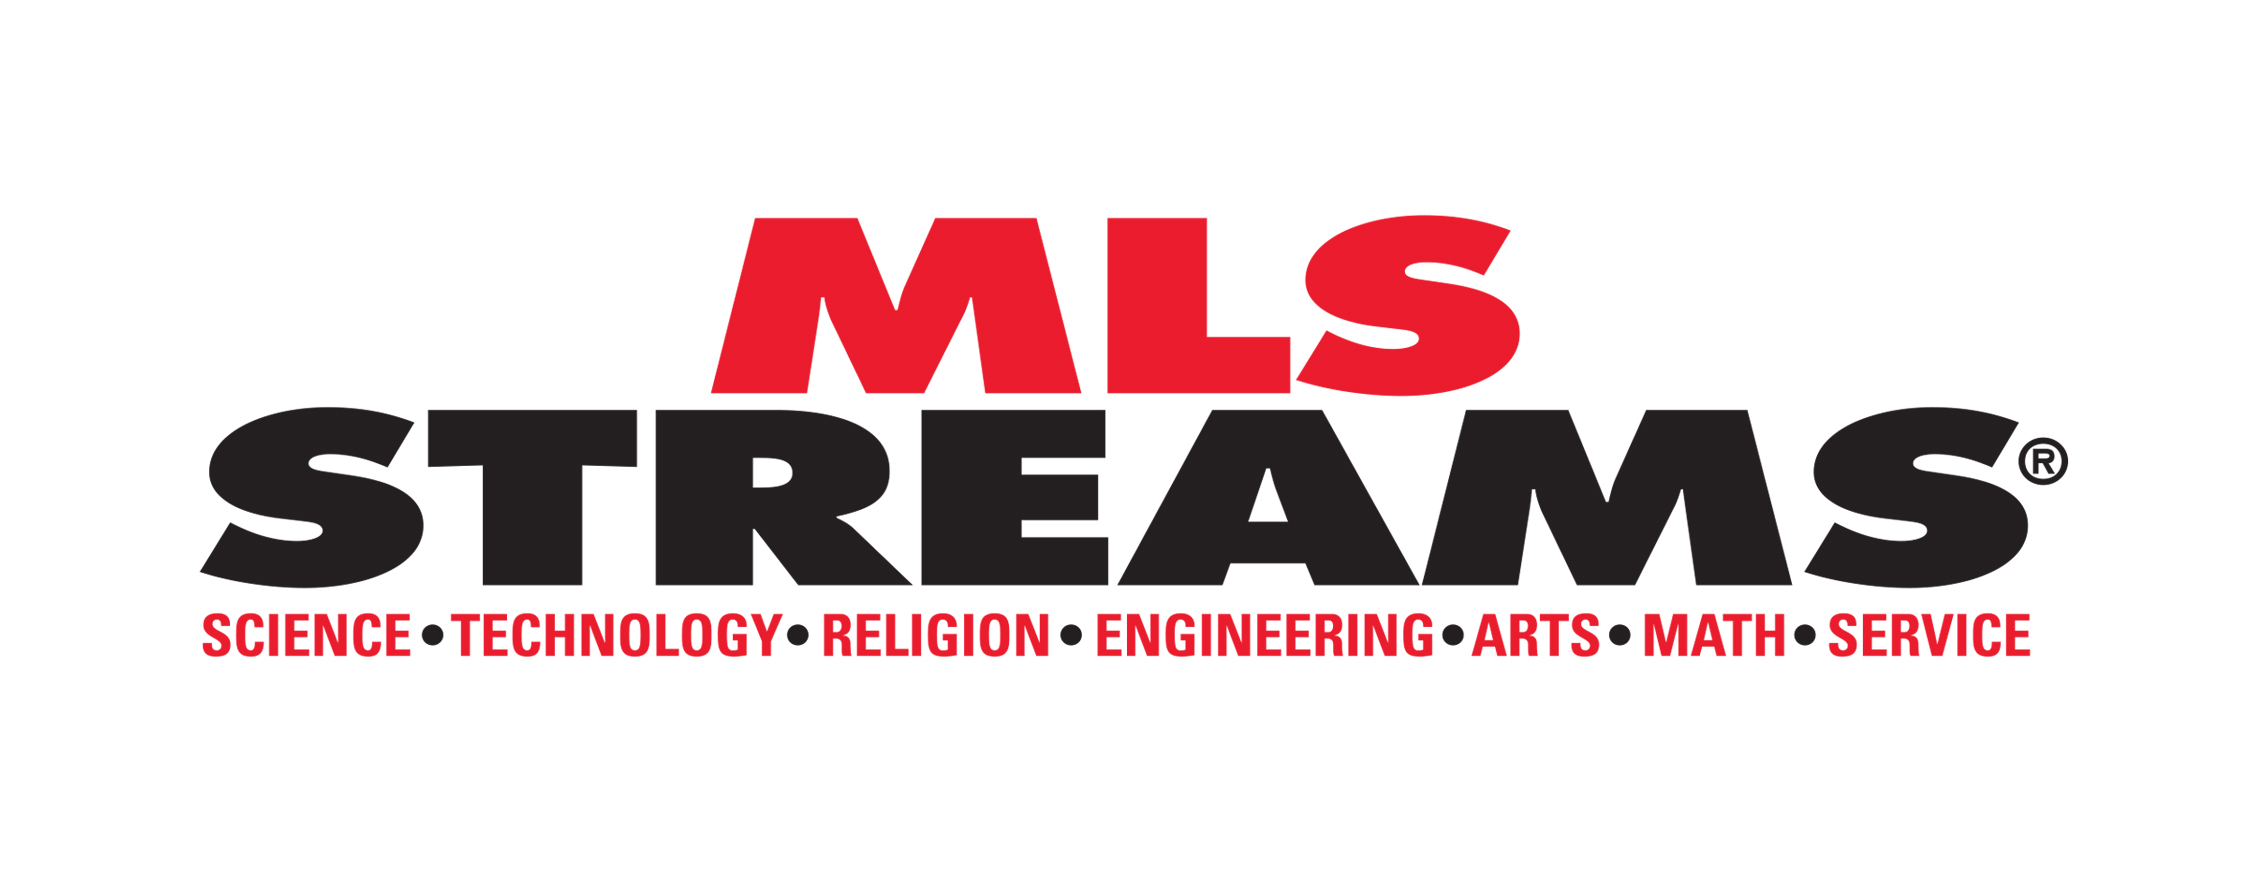 Martin Luther Schools MLS STREAMS® curriculum surges ahead